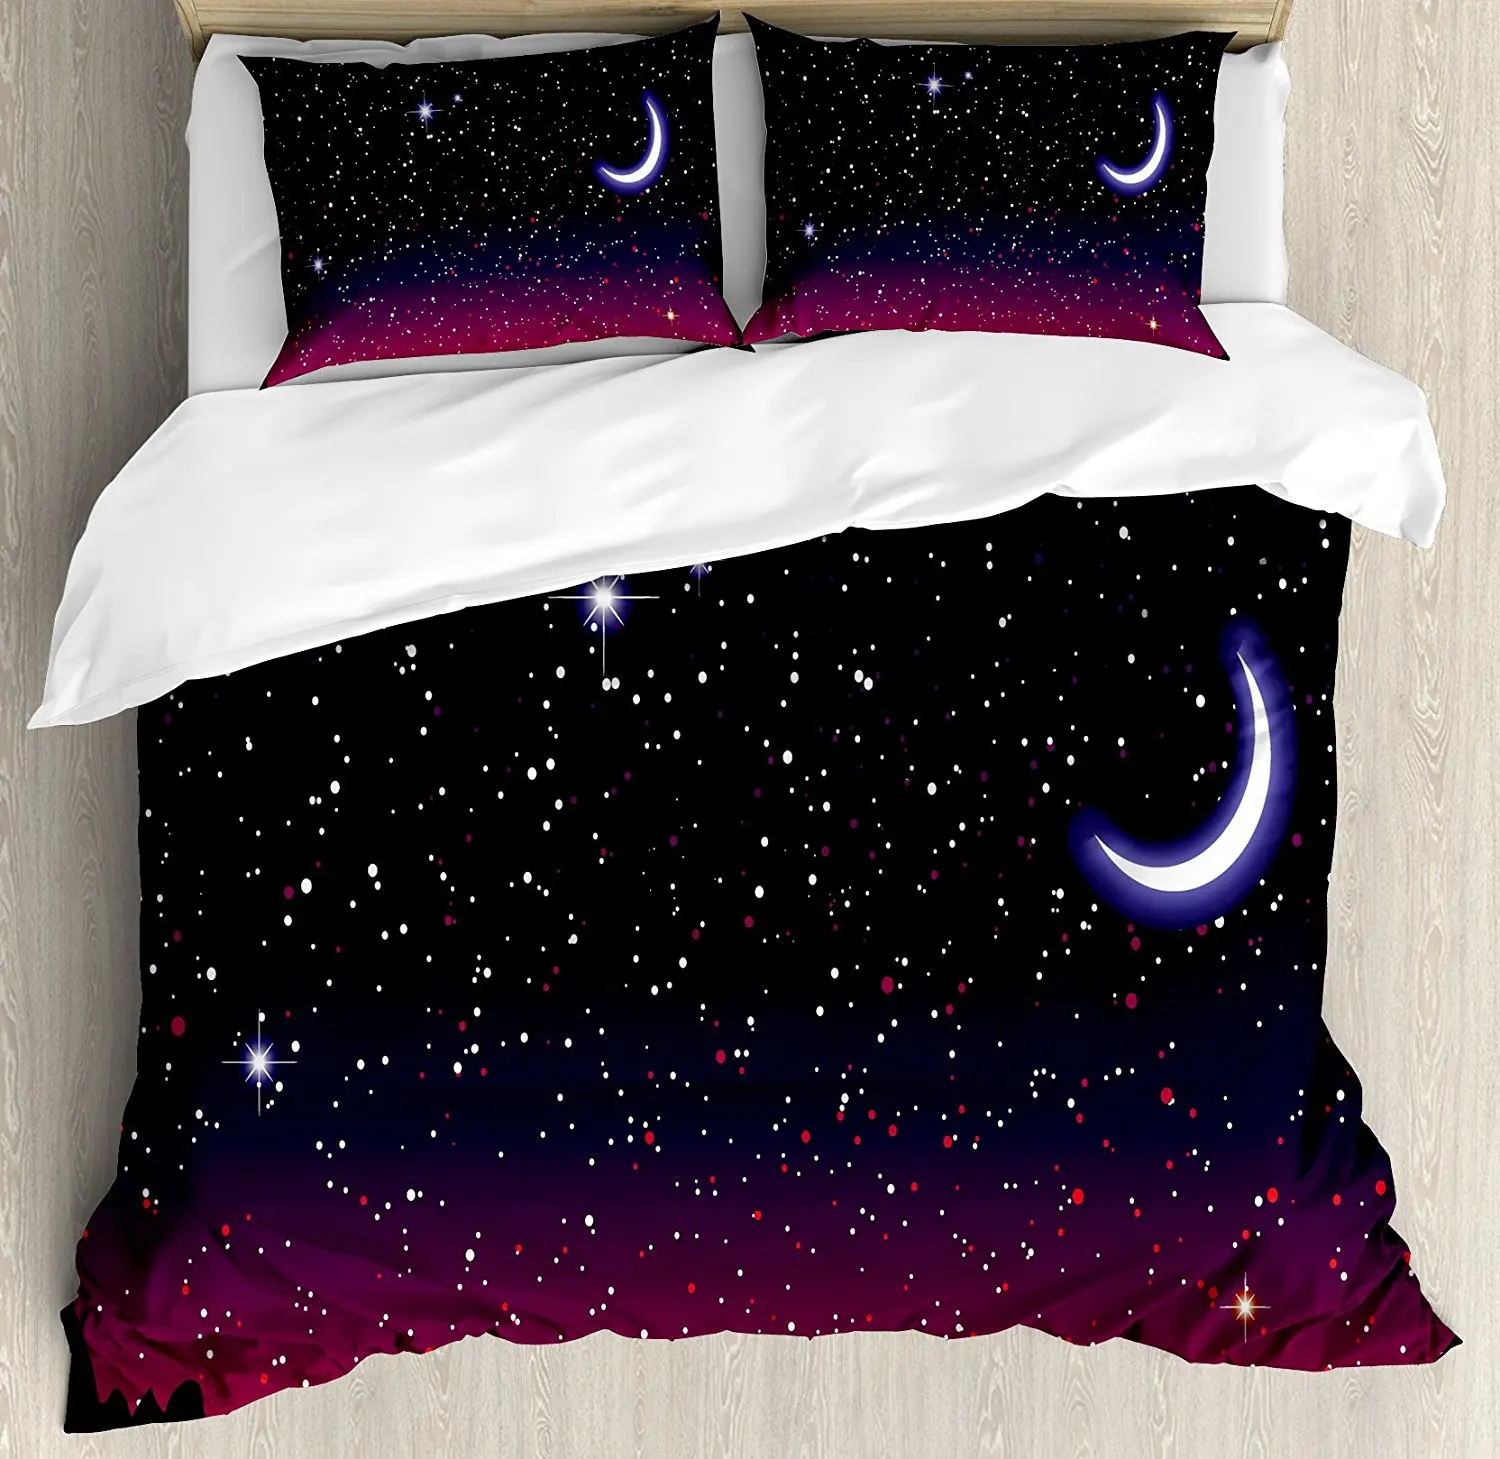 

Night Duvet Cover Set Red Sky at Night with Starry Landscape and Mountains Astrology Astronomy, Decorative 4 Piece Bedding Set